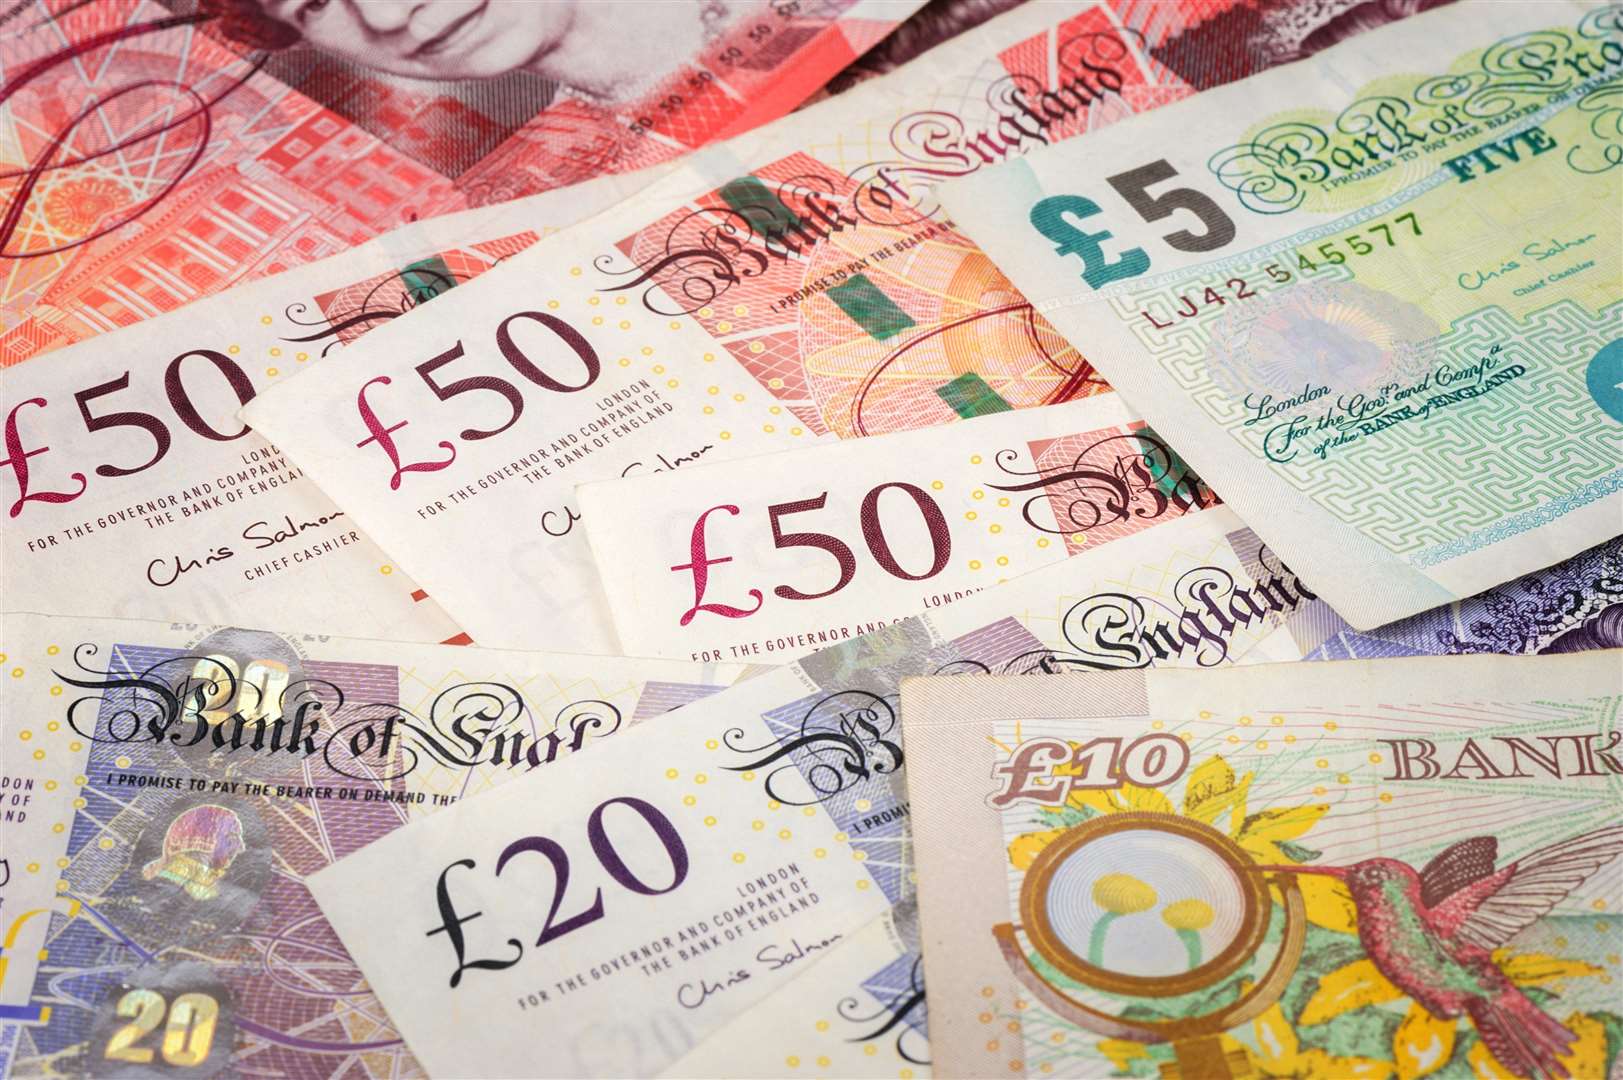 Almost £10,000 has been stolen from pensioners